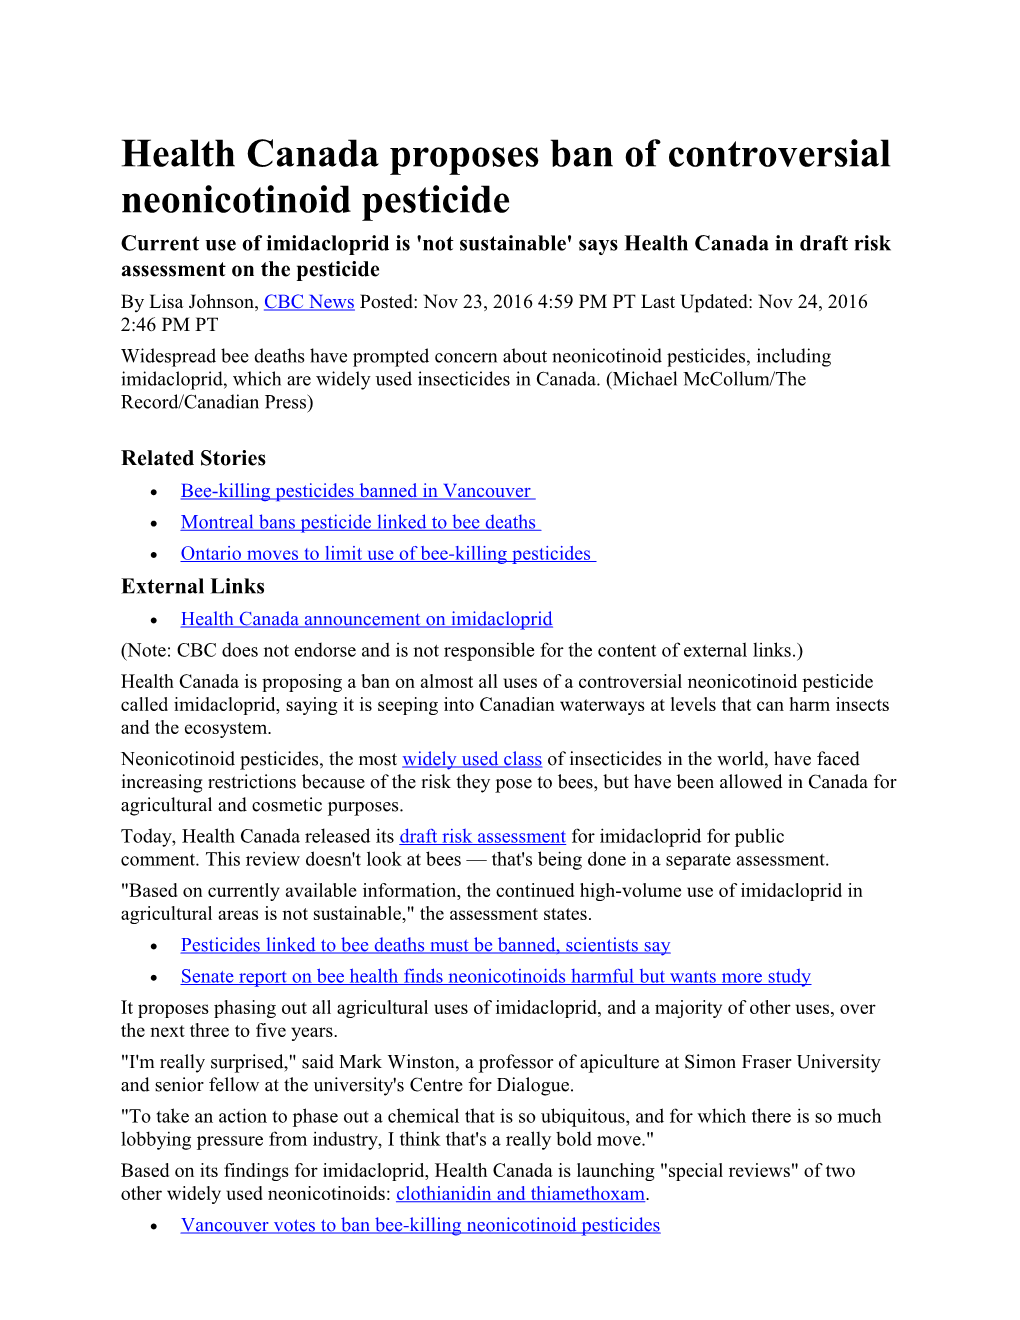 Health Canada Proposes Ban of Controversial Neonicotinoid Pesticide